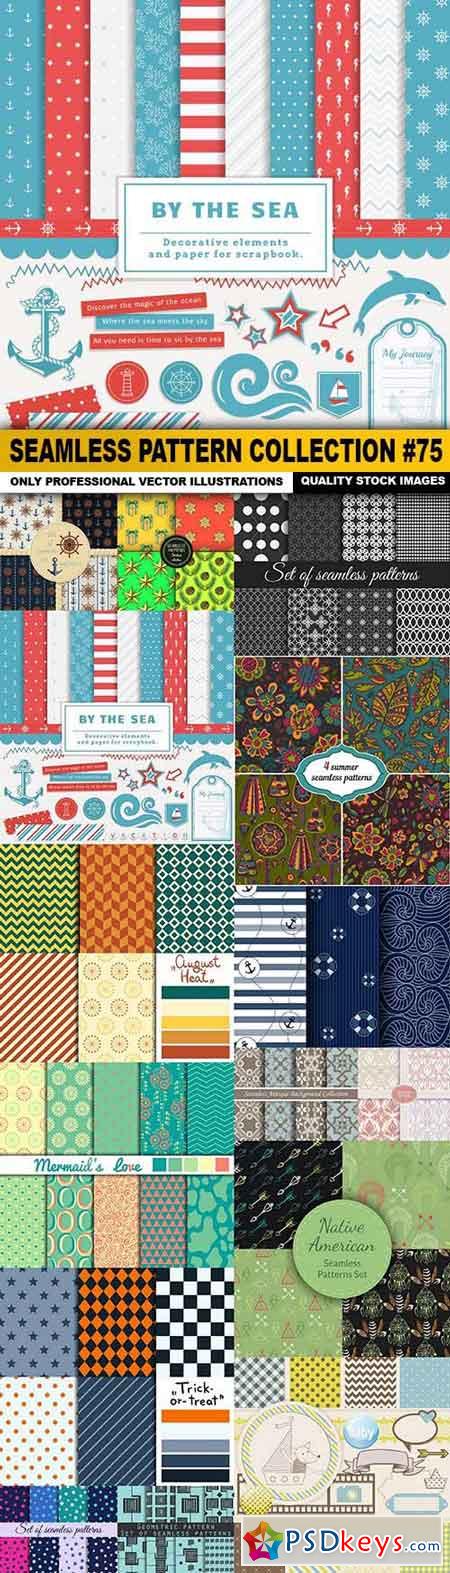 Seamless Pattern Collection #75 - 15 Vector